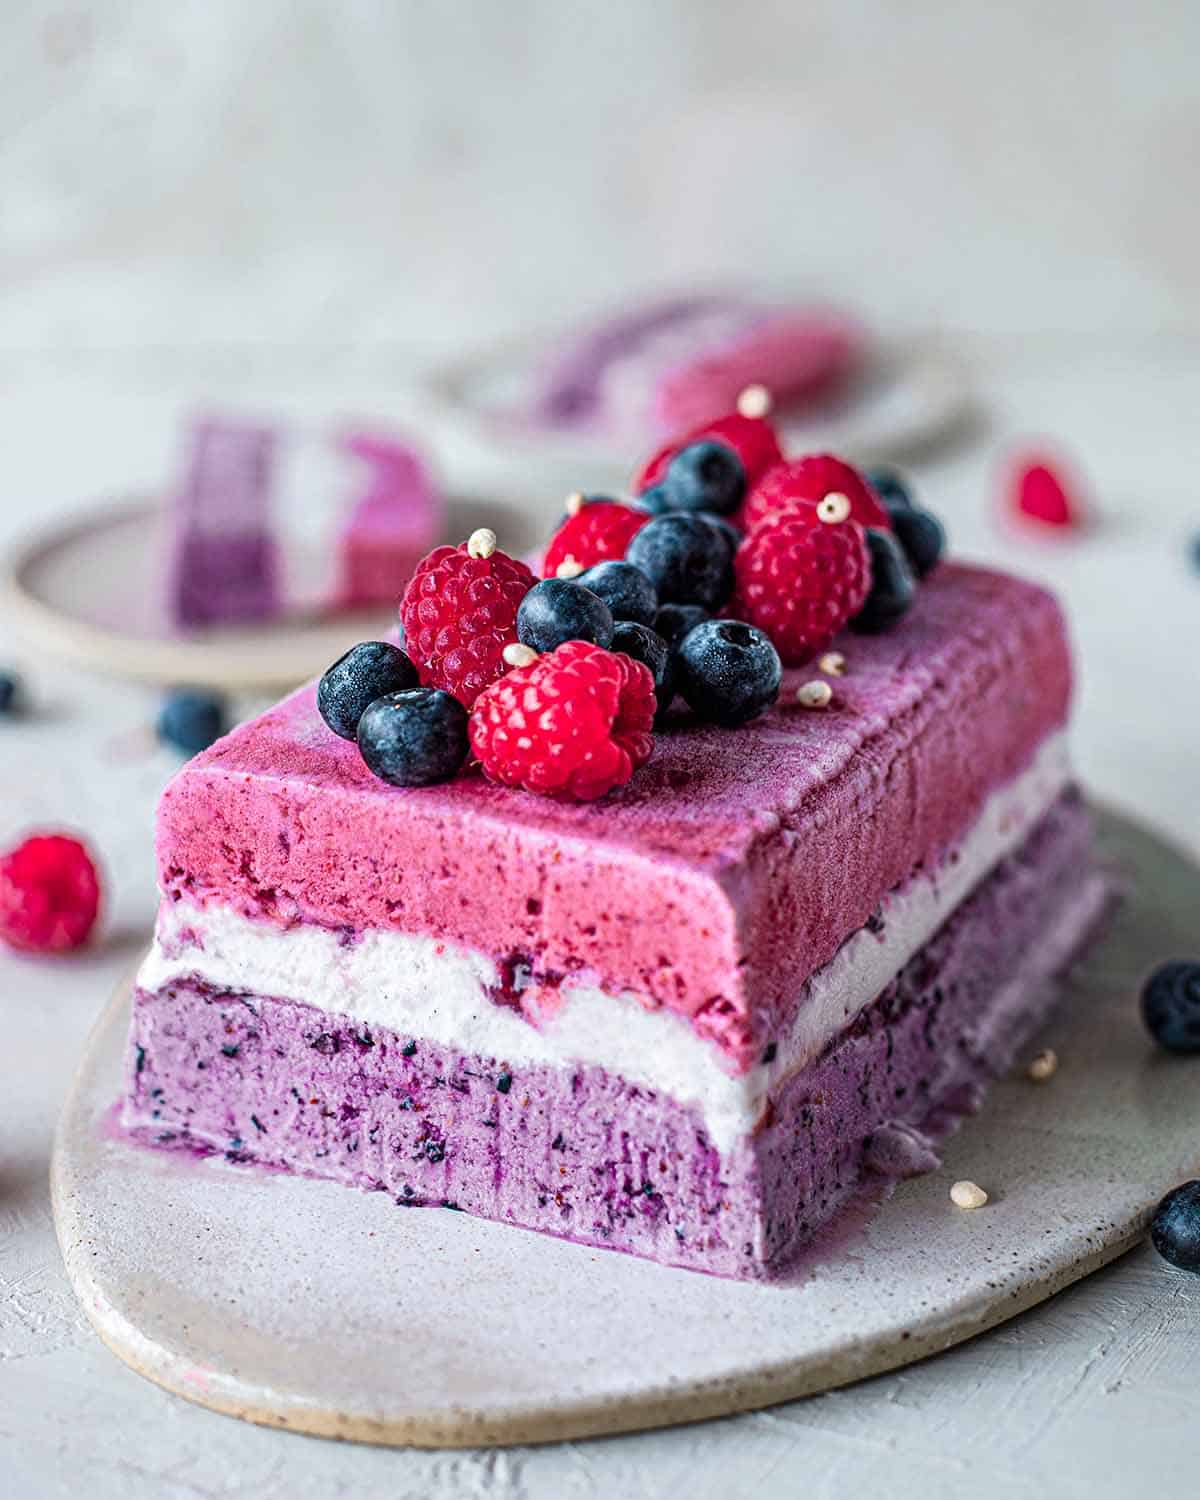 Easy vegan berry ice cream cake recipe with a hint of 'cheesecake' made with only 4-5 ingredients! The vibrant colors makes it a perfect centerpiece for celebrations.